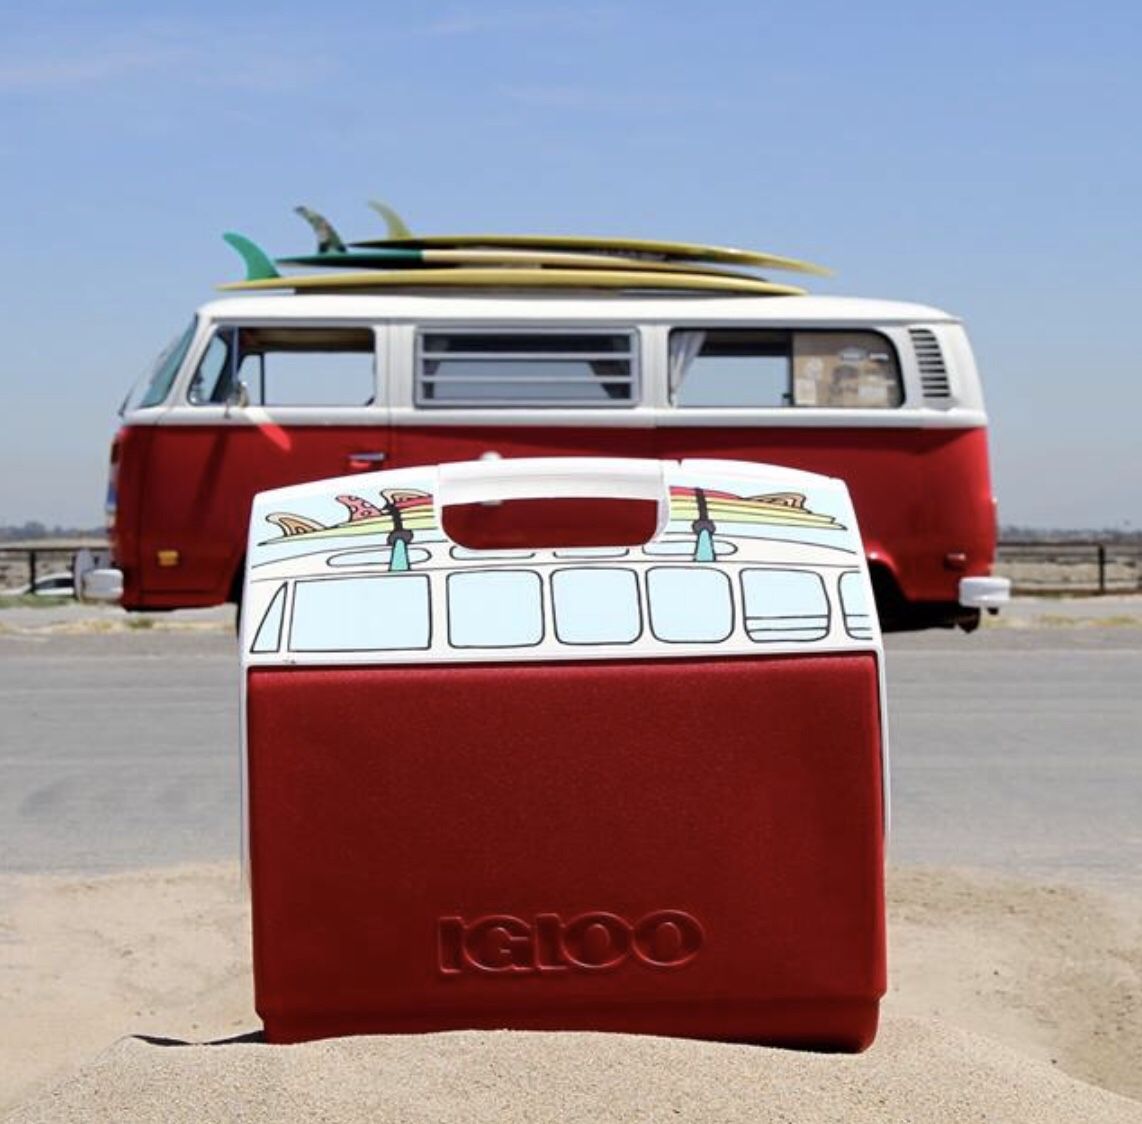 Sold out Limited Edition VW bus Igloo cooler- great gift!